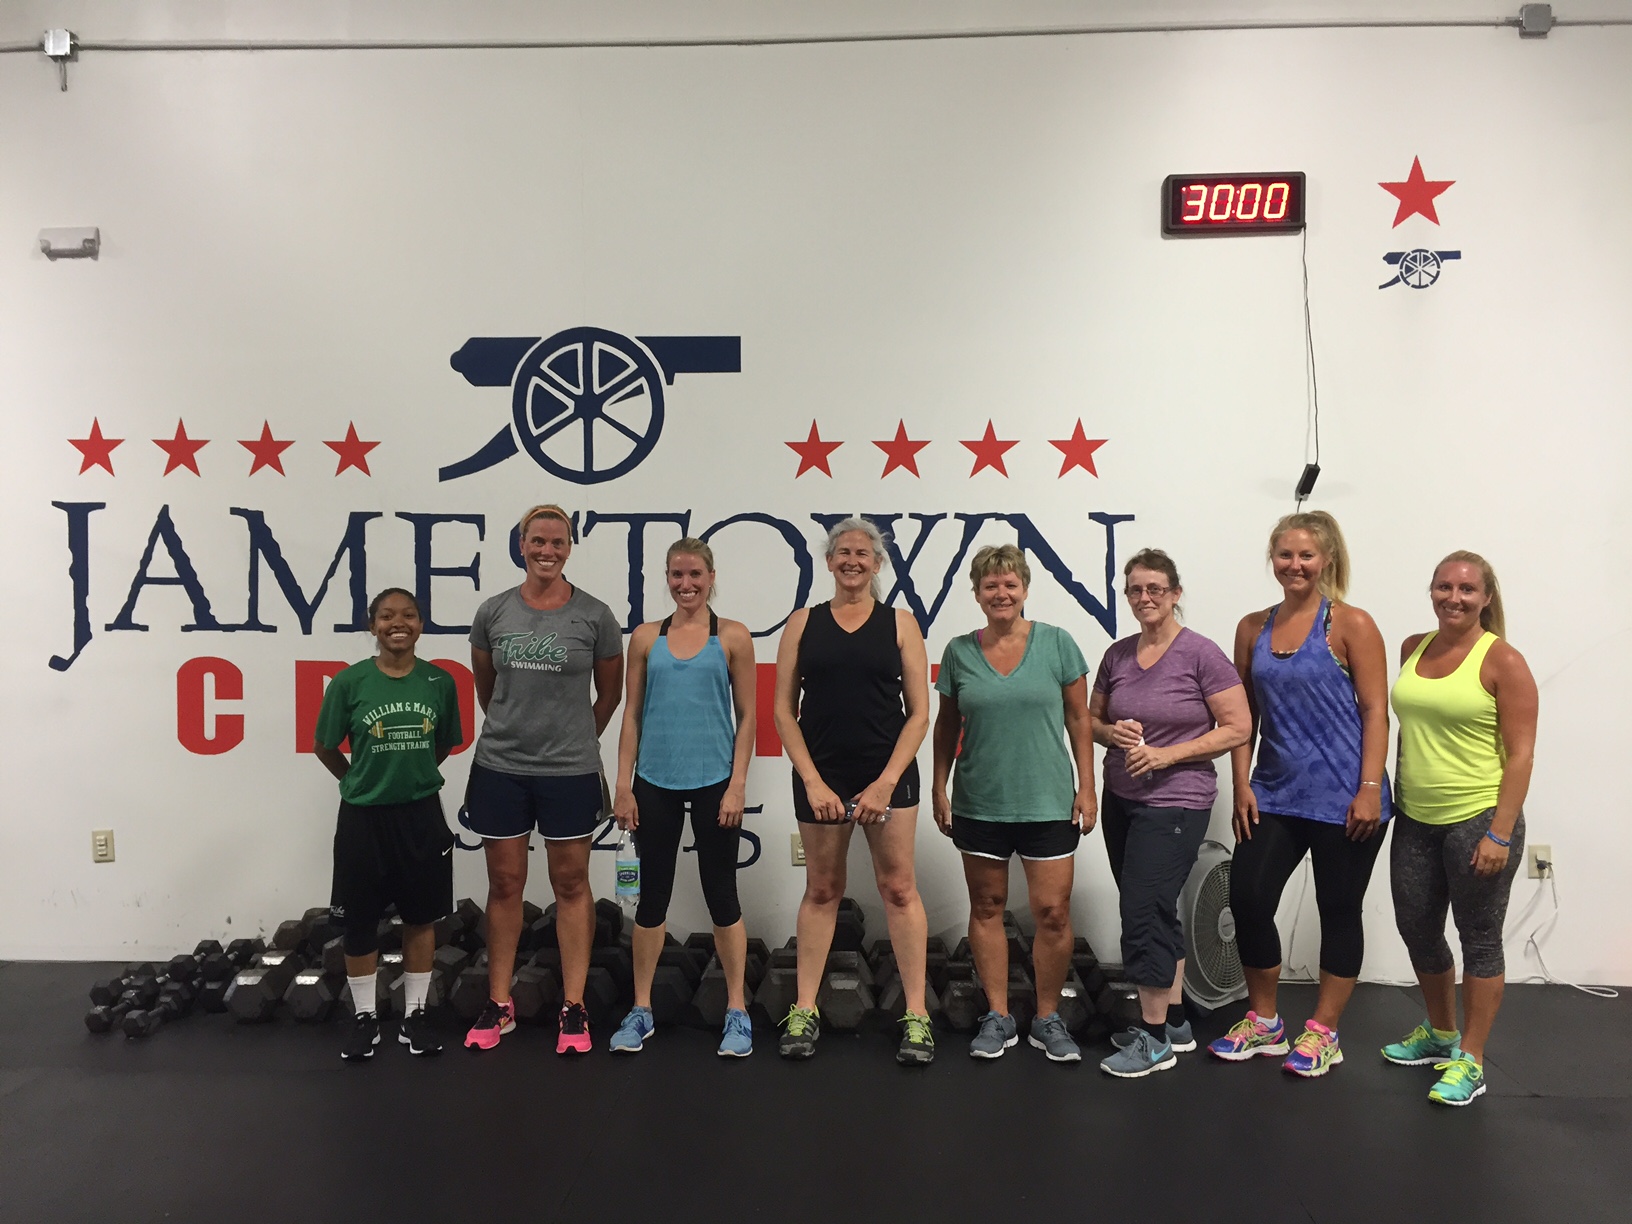 Members of the Women's Network participated in a CrossFit class at Jamestown CrossFit